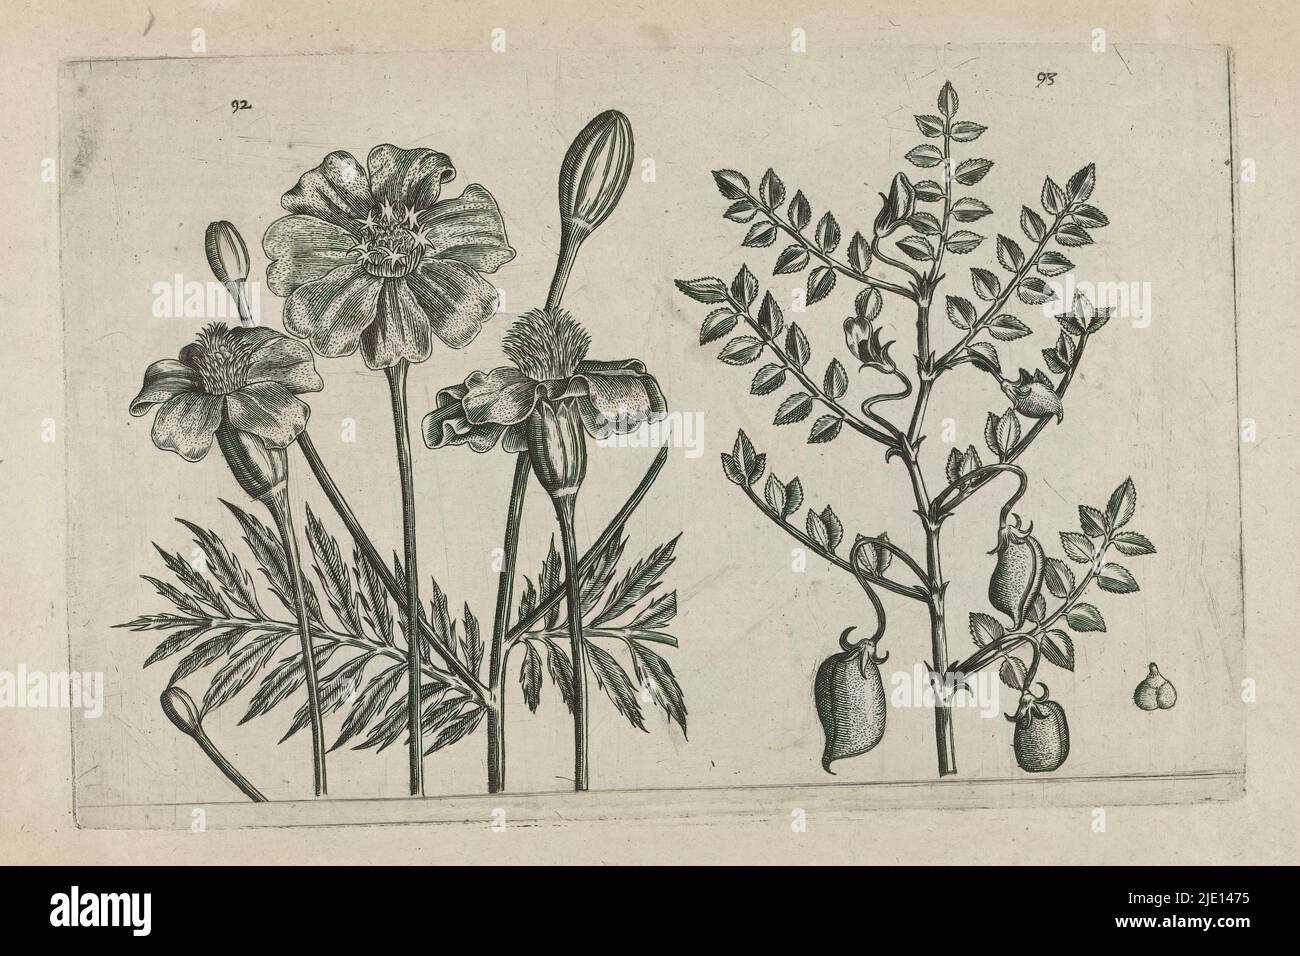 African anther and chickpea, Cognoscite lilia (series title), African anther (tagetes patula) and chickpea (Cicer arietinum), numbered 92 and 93., print maker: Crispijn van de Passe (I), (attributed to), after drawing by: Crispijn van de Passe (I), (attributed to), publisher: Crispijn van de Passe (I), print maker: Cologne, after drawing by: Cologne, publisher: Cologne, publisher: London, 1600 - 1604, paper, engraving, height 127 mm × width 205 mm, height 172 mm × width 272 mm Stock Photo